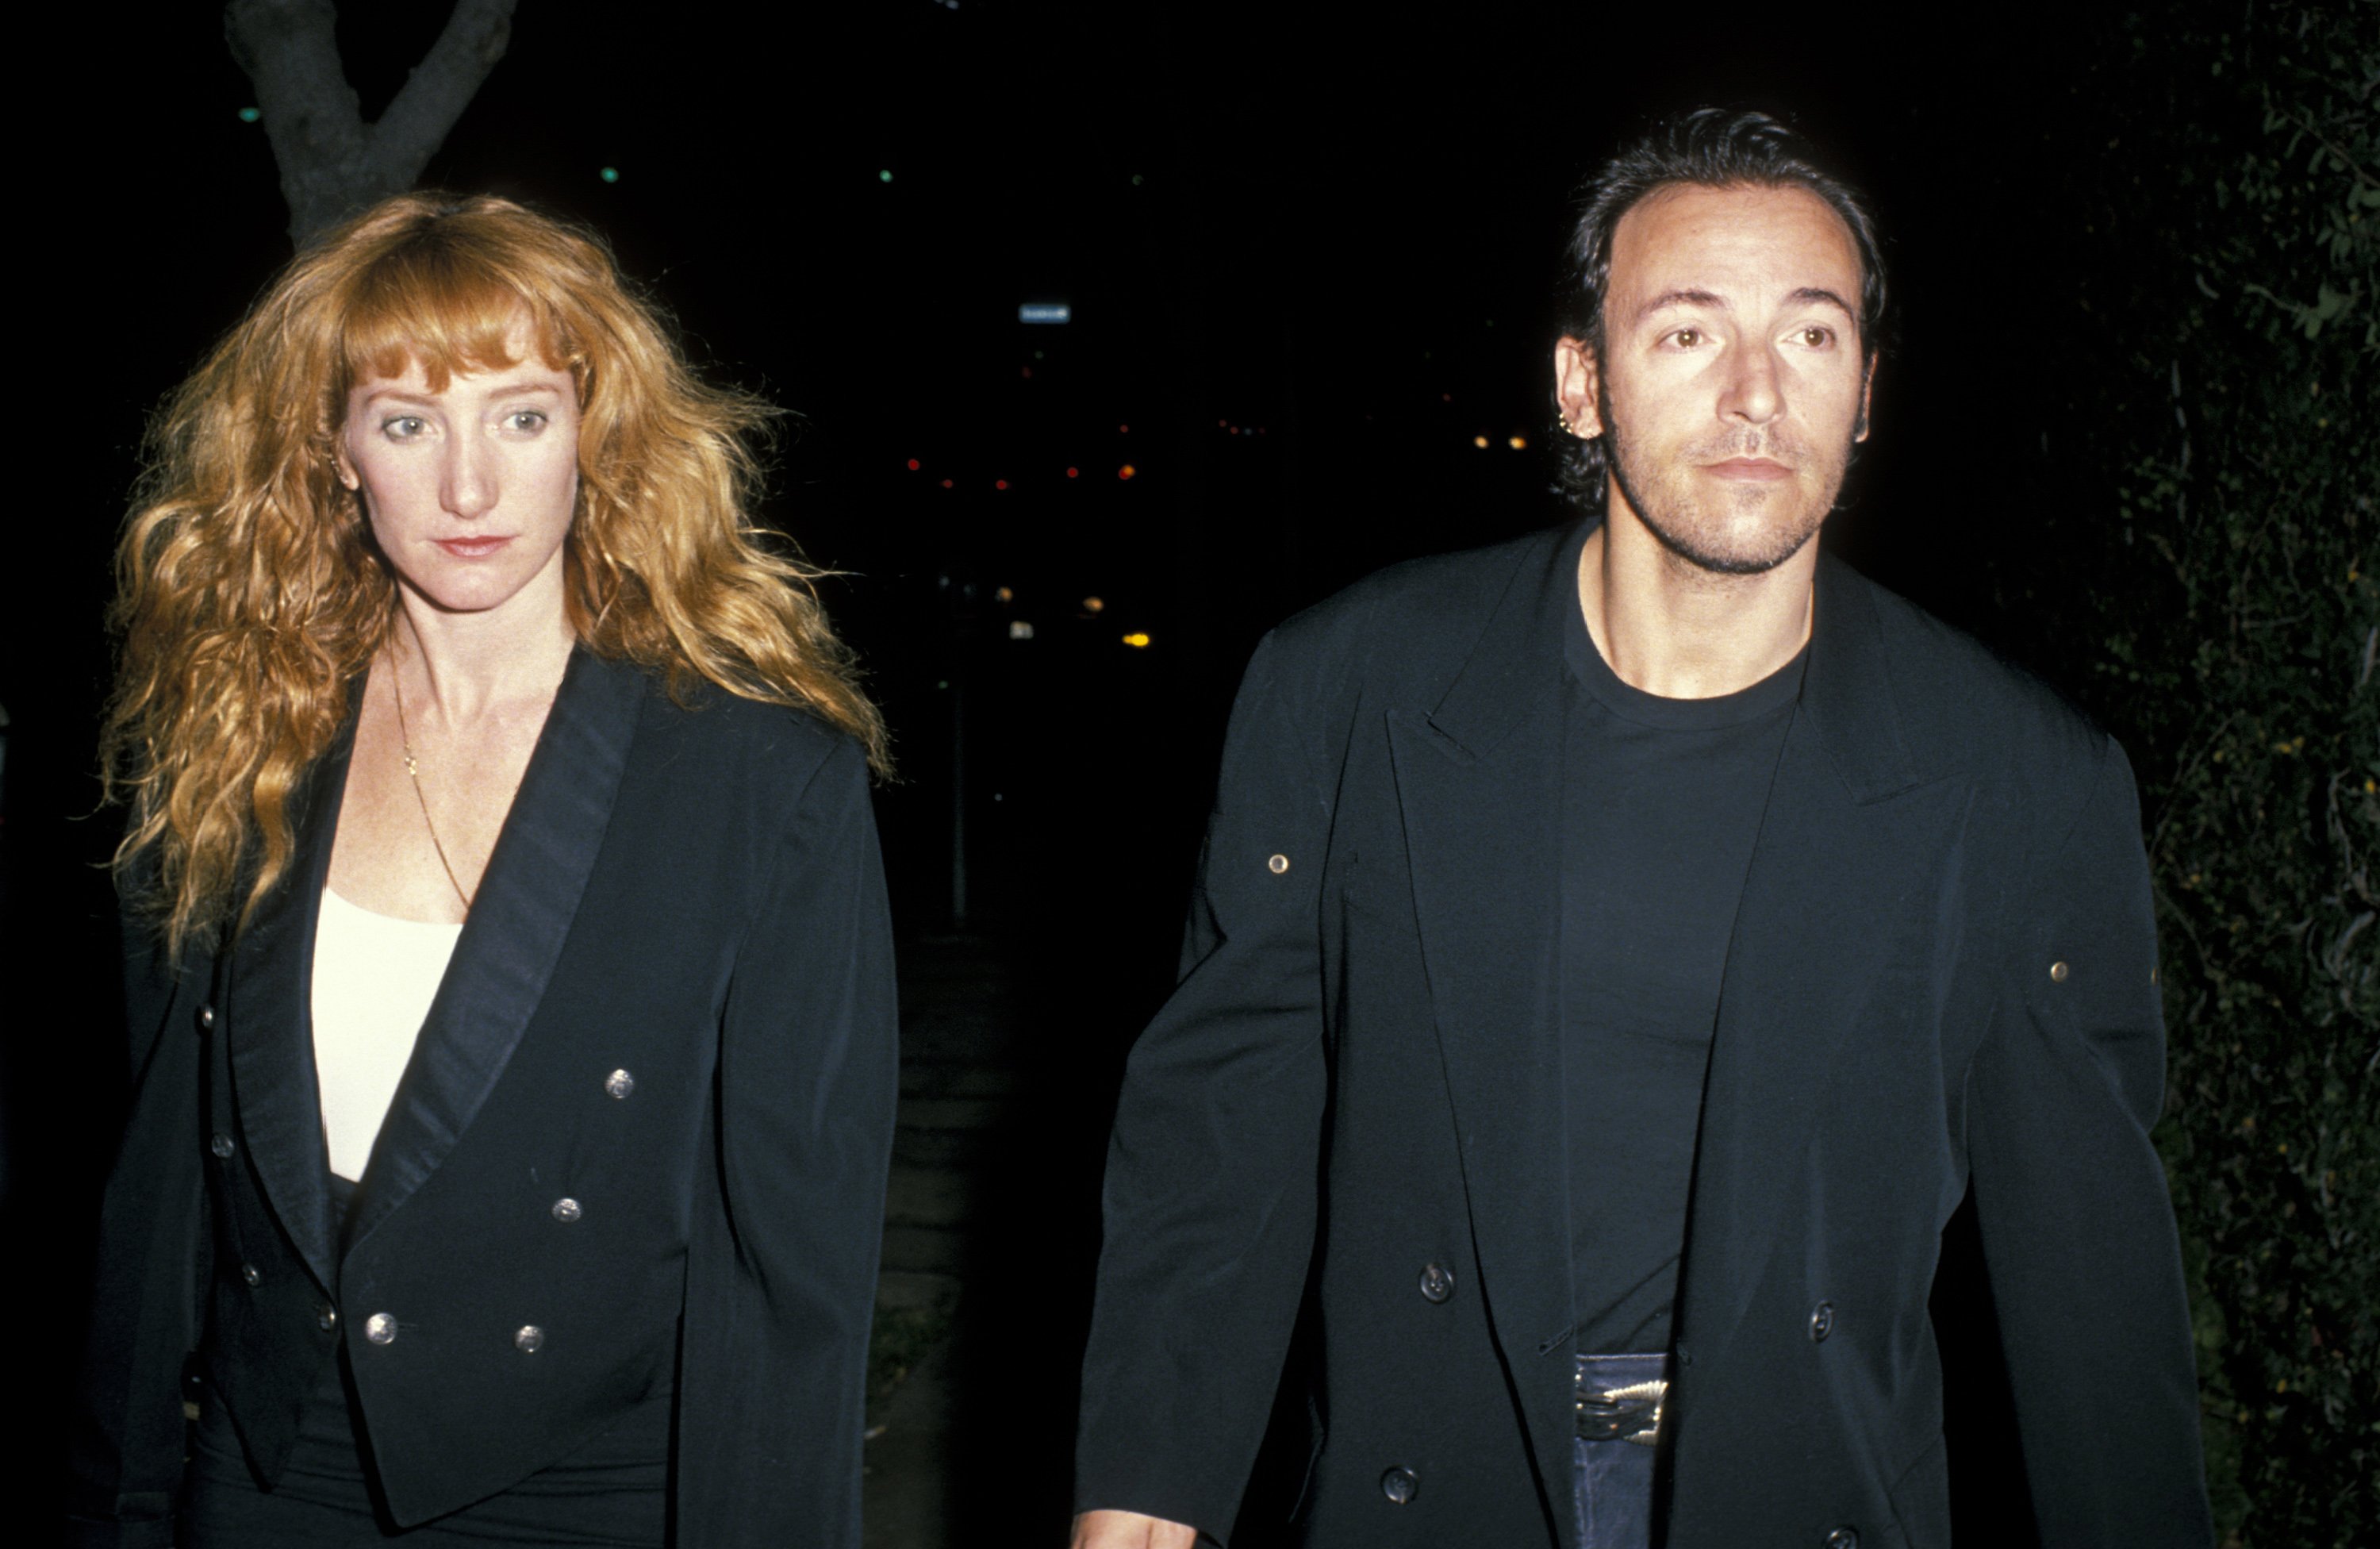 Julianne Phillips and Bruce Springsteen during "Hurlyburly" Premiere at Westwood Theater in Westwood, California, United States. | Source: Getty Images